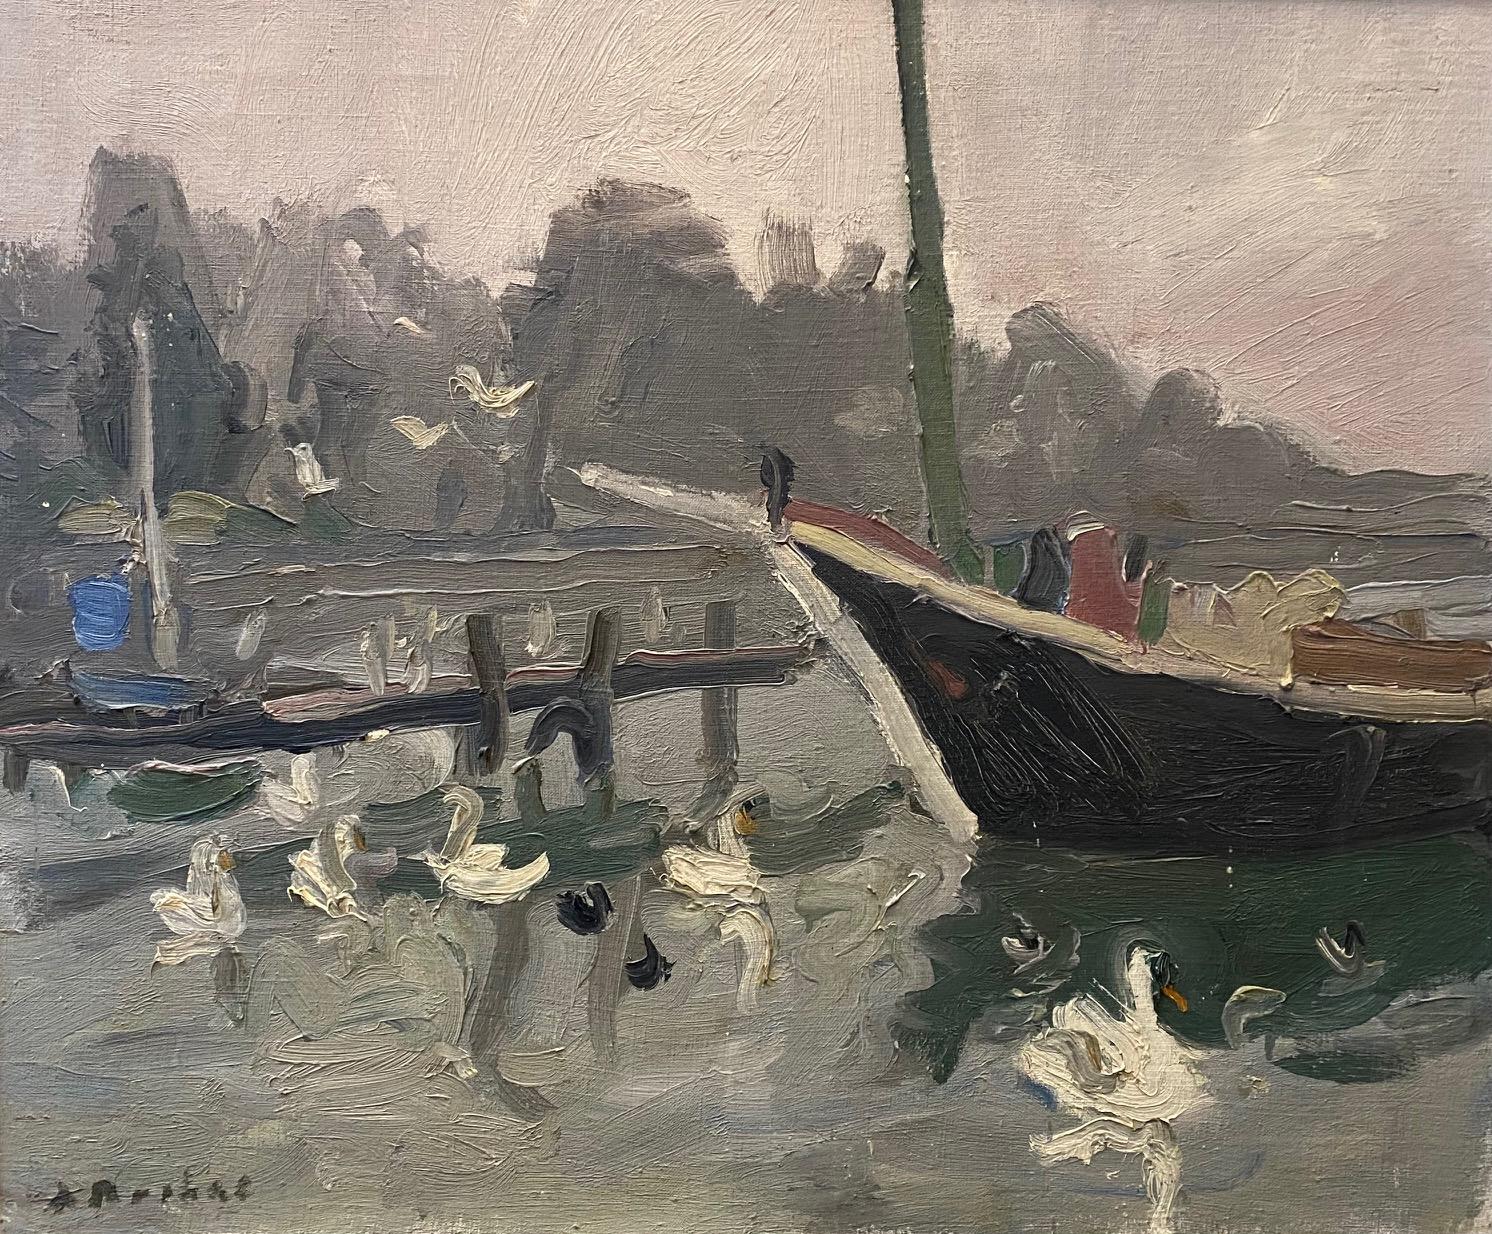 Oil on canvas sold with frame 
Total size with frame 63x72 cm
Alexandre ROCHAT is an artist born in France in 1895 and died in 1981. His works have been sold at public auction 77 times, mainly in the Painting category.